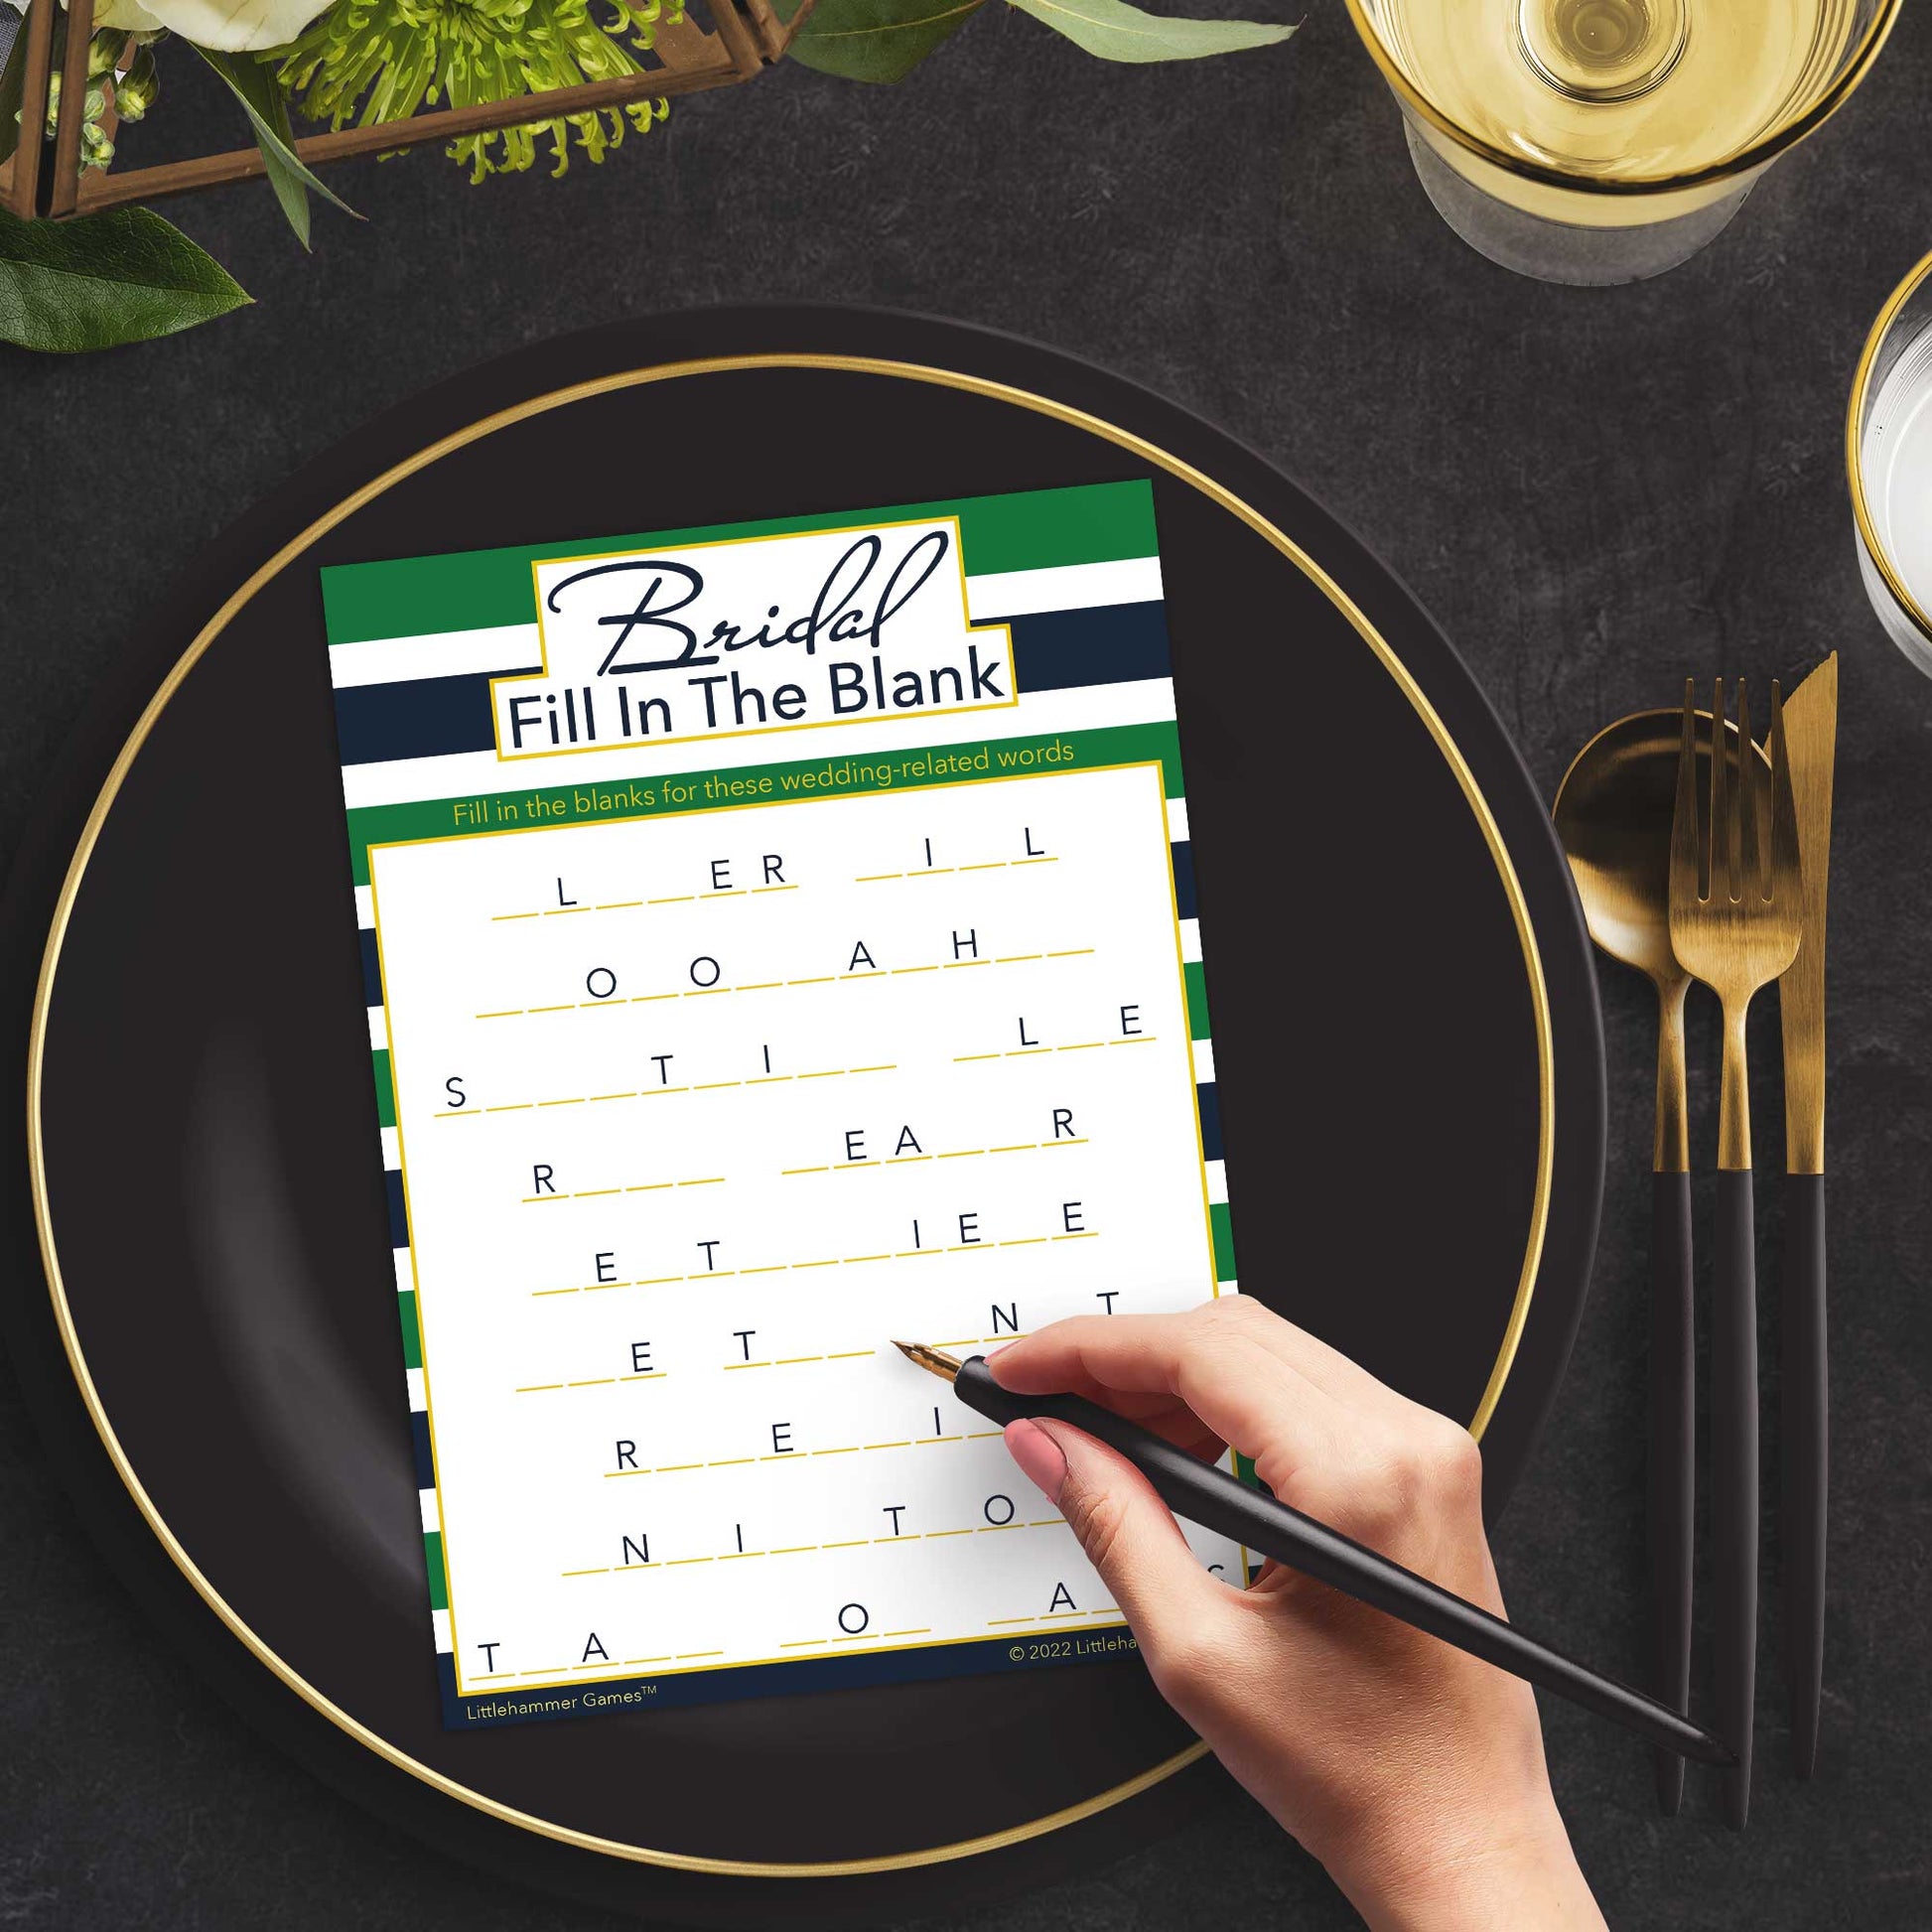 Woman with a pen playing a green and navy-striped Bridal Fill in the Blank game card at a dark place setting